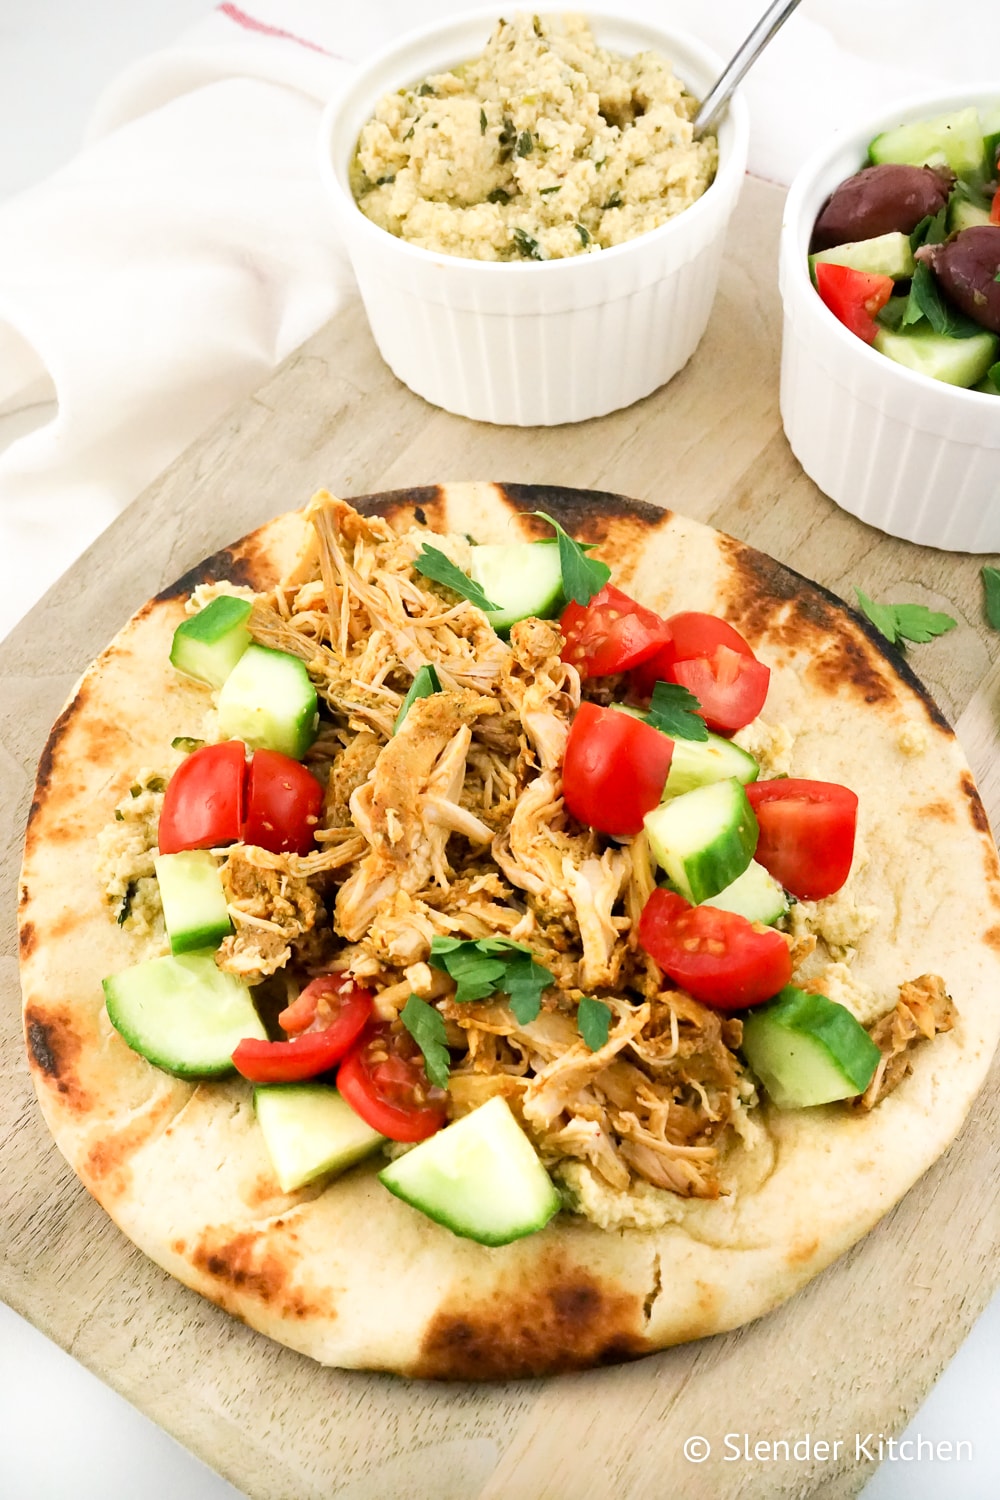 Slow Cooker Chicken Shawarma in a pita with hummus and salad.